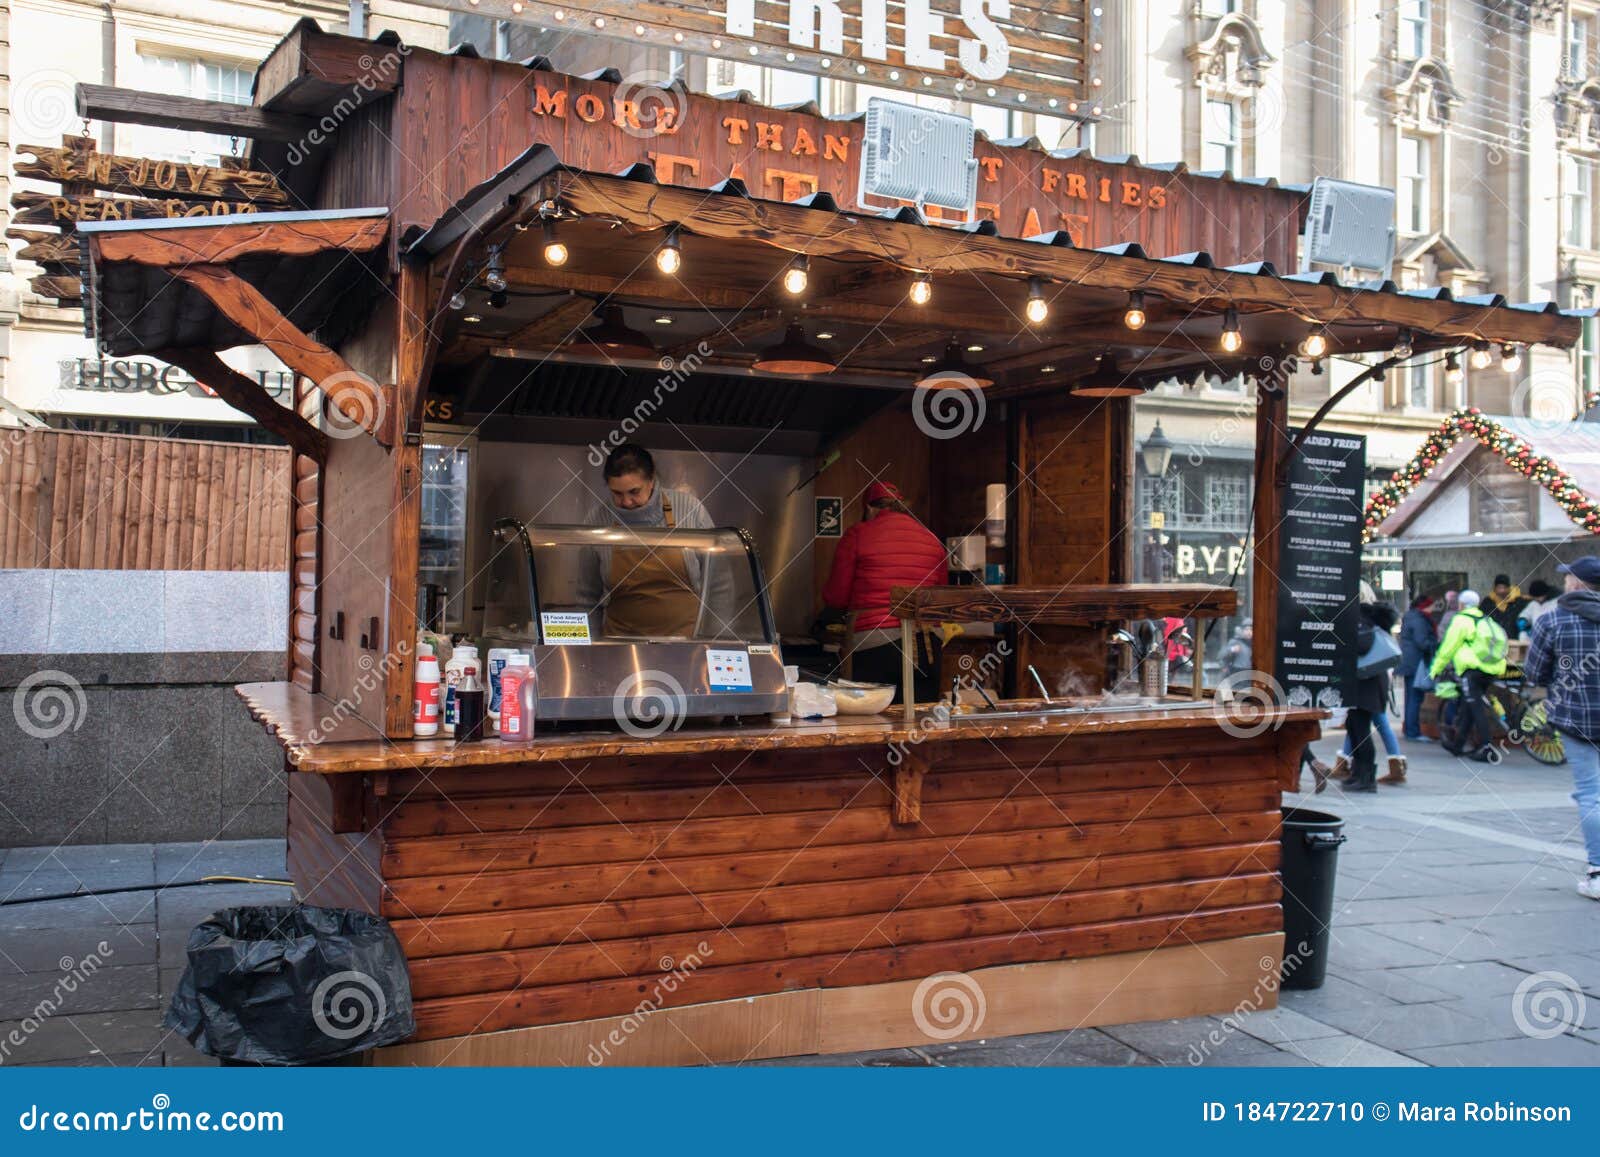 Street Food Vendor Kiosk Selling Hot Cooked Food In The Street Editorial Image - Image of background, sale: 184722710